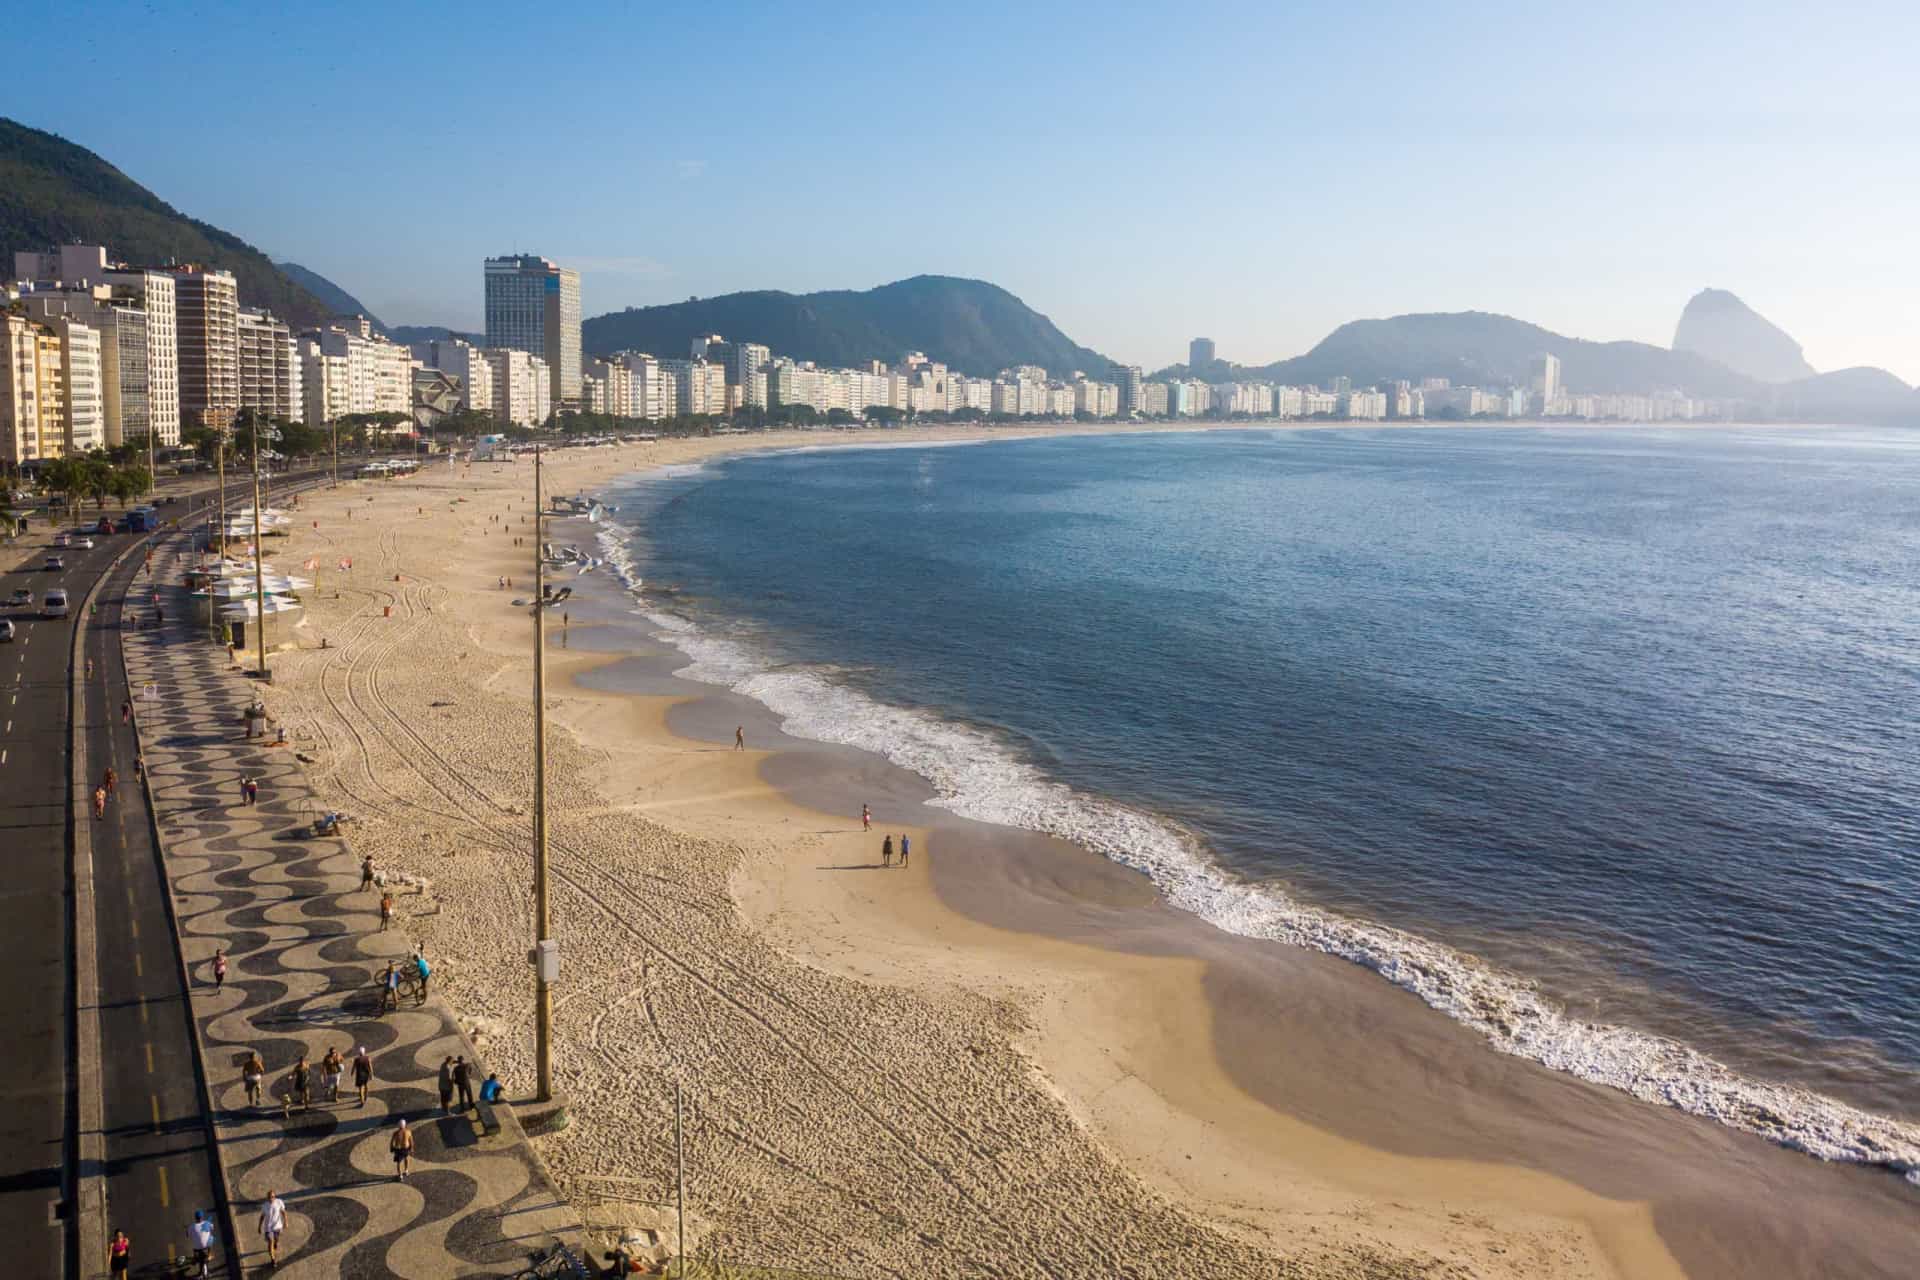 <p>This stretch of Rio de Janeiro became particularly famous in 1970, after Brazilian landscape architect Roberto Burle Marx designed the iconic Copacabana promenade.</p>